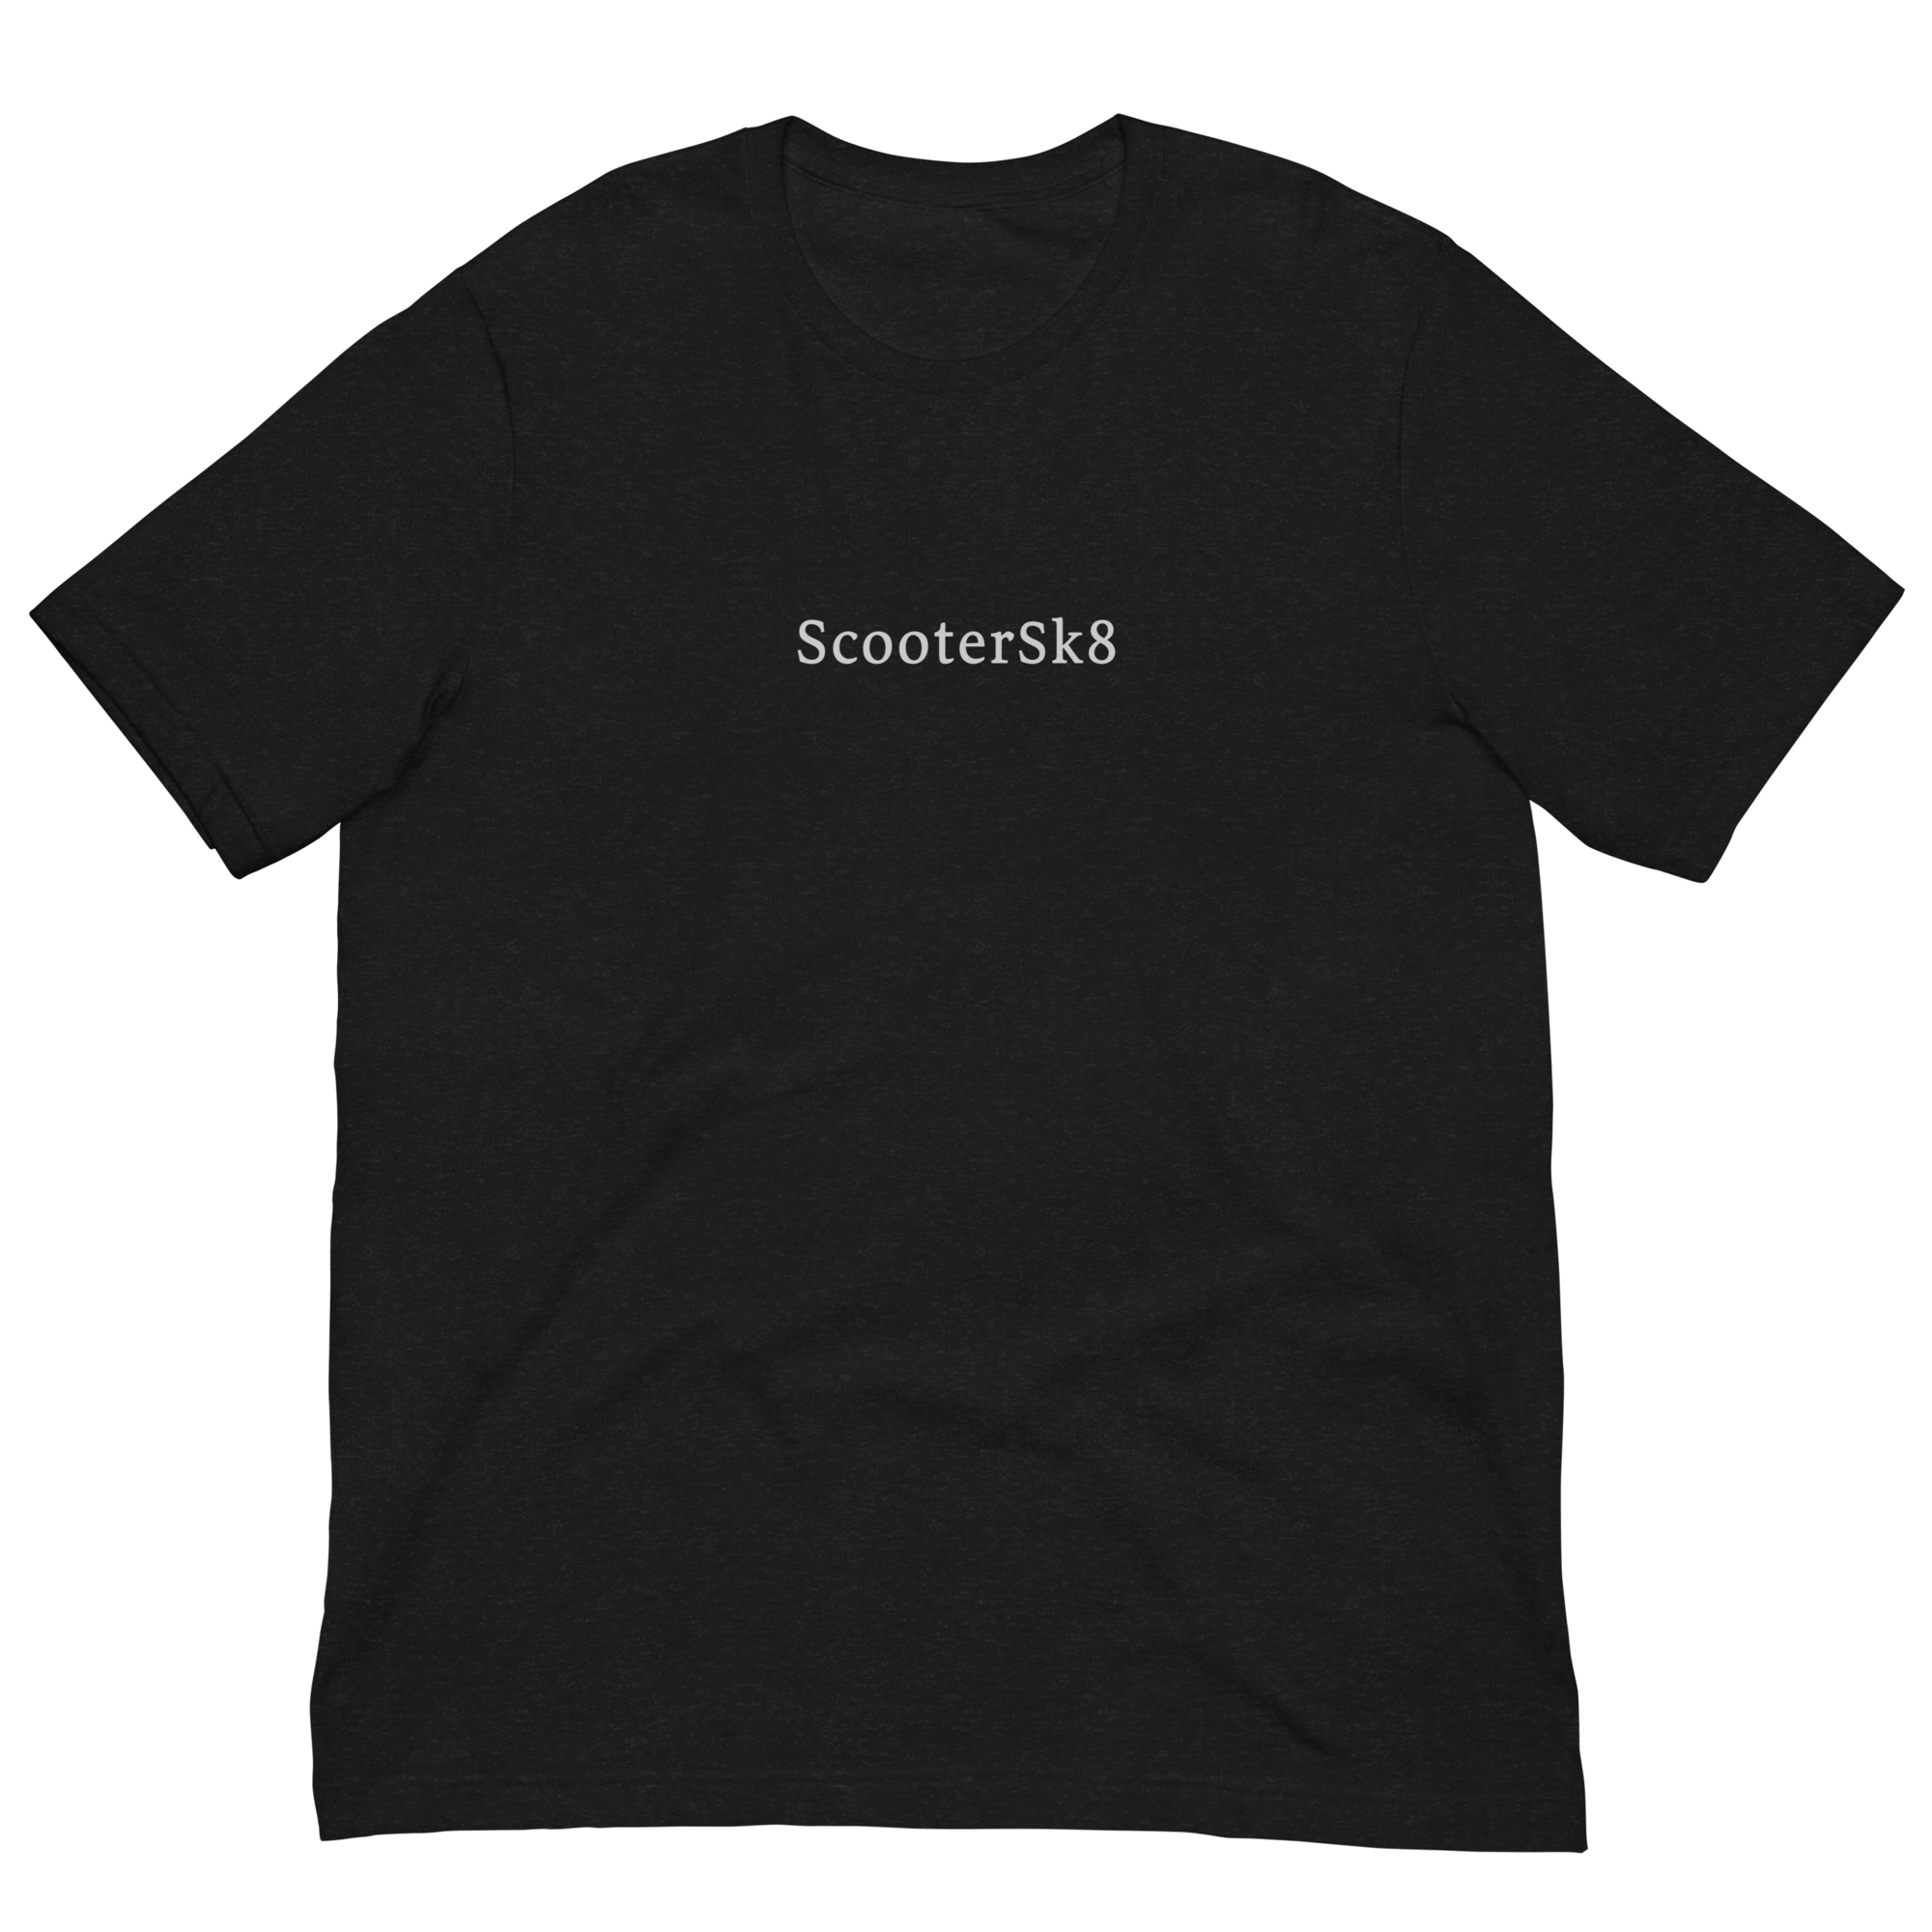 T-shirt Scootersk8 official